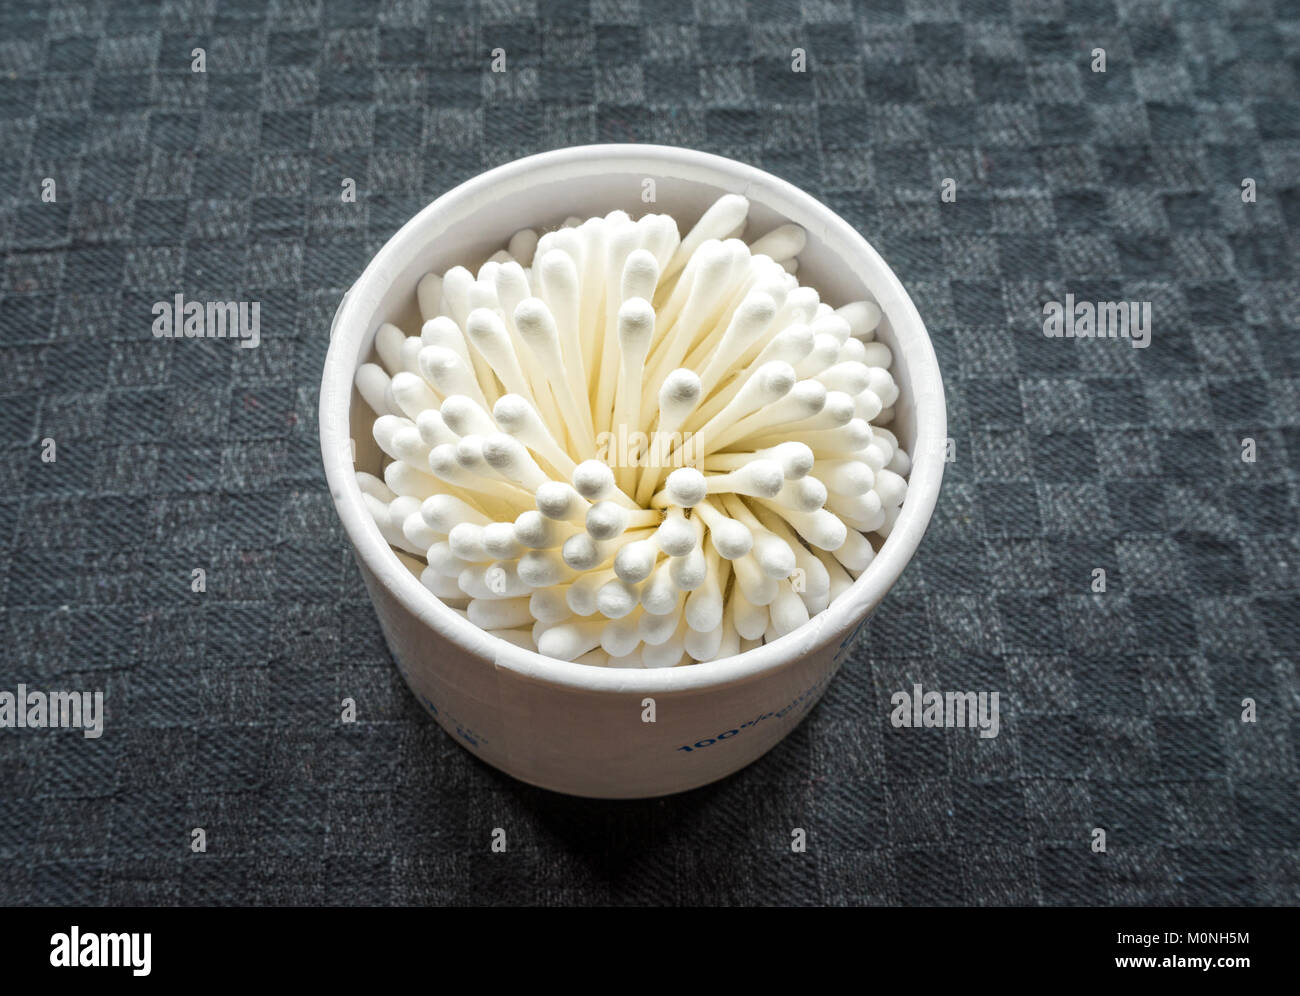 High angle view of a box of paper stemmed white cotton buds against black background Stock Photo